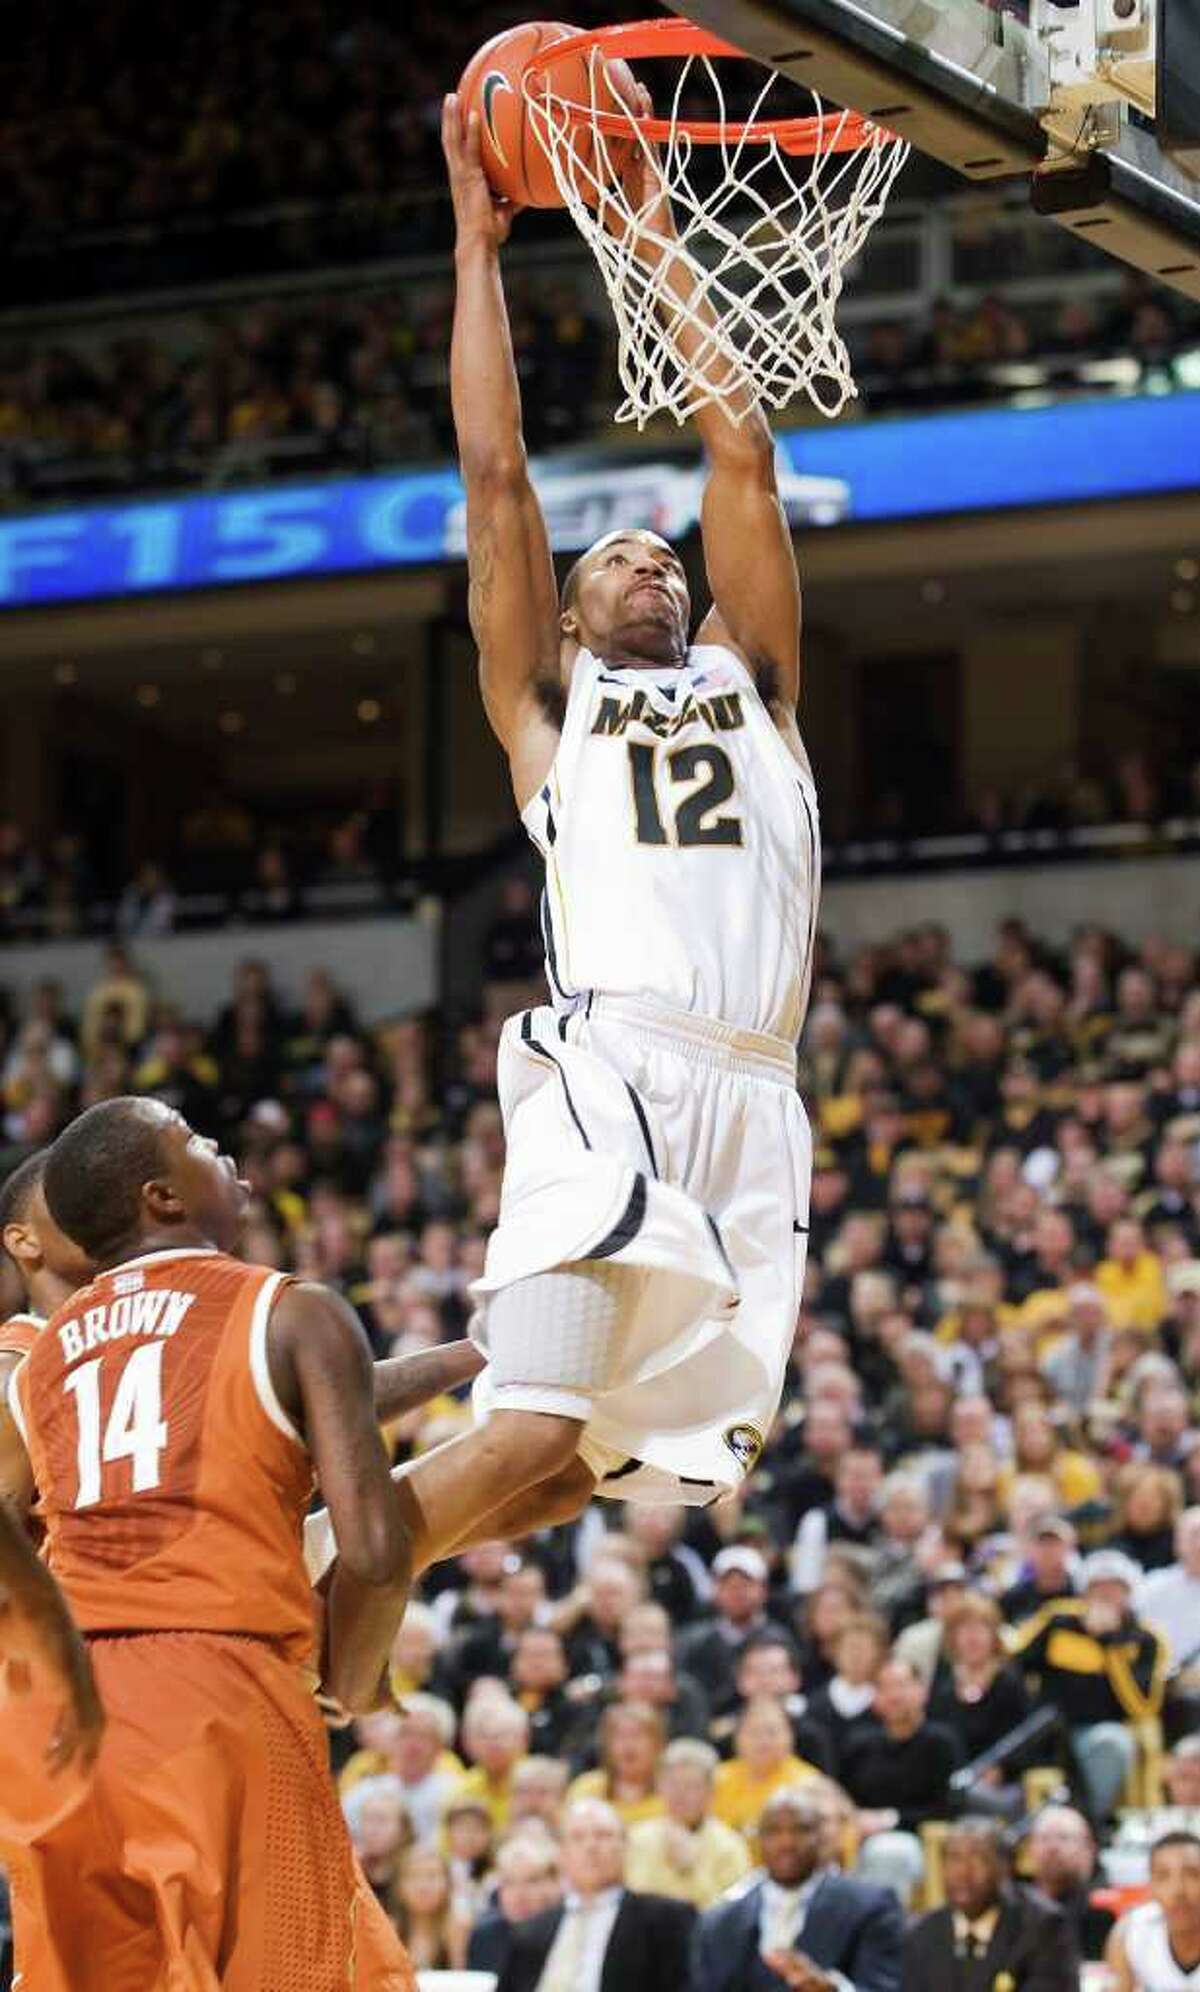 Missouri’s Marcus Denmon dunks as Texas’ J’Covan Brown can only watch. Denmon had 18 points and 11 rebounds in the Tigers’ victory, while Brown’s 34 points went for naught.